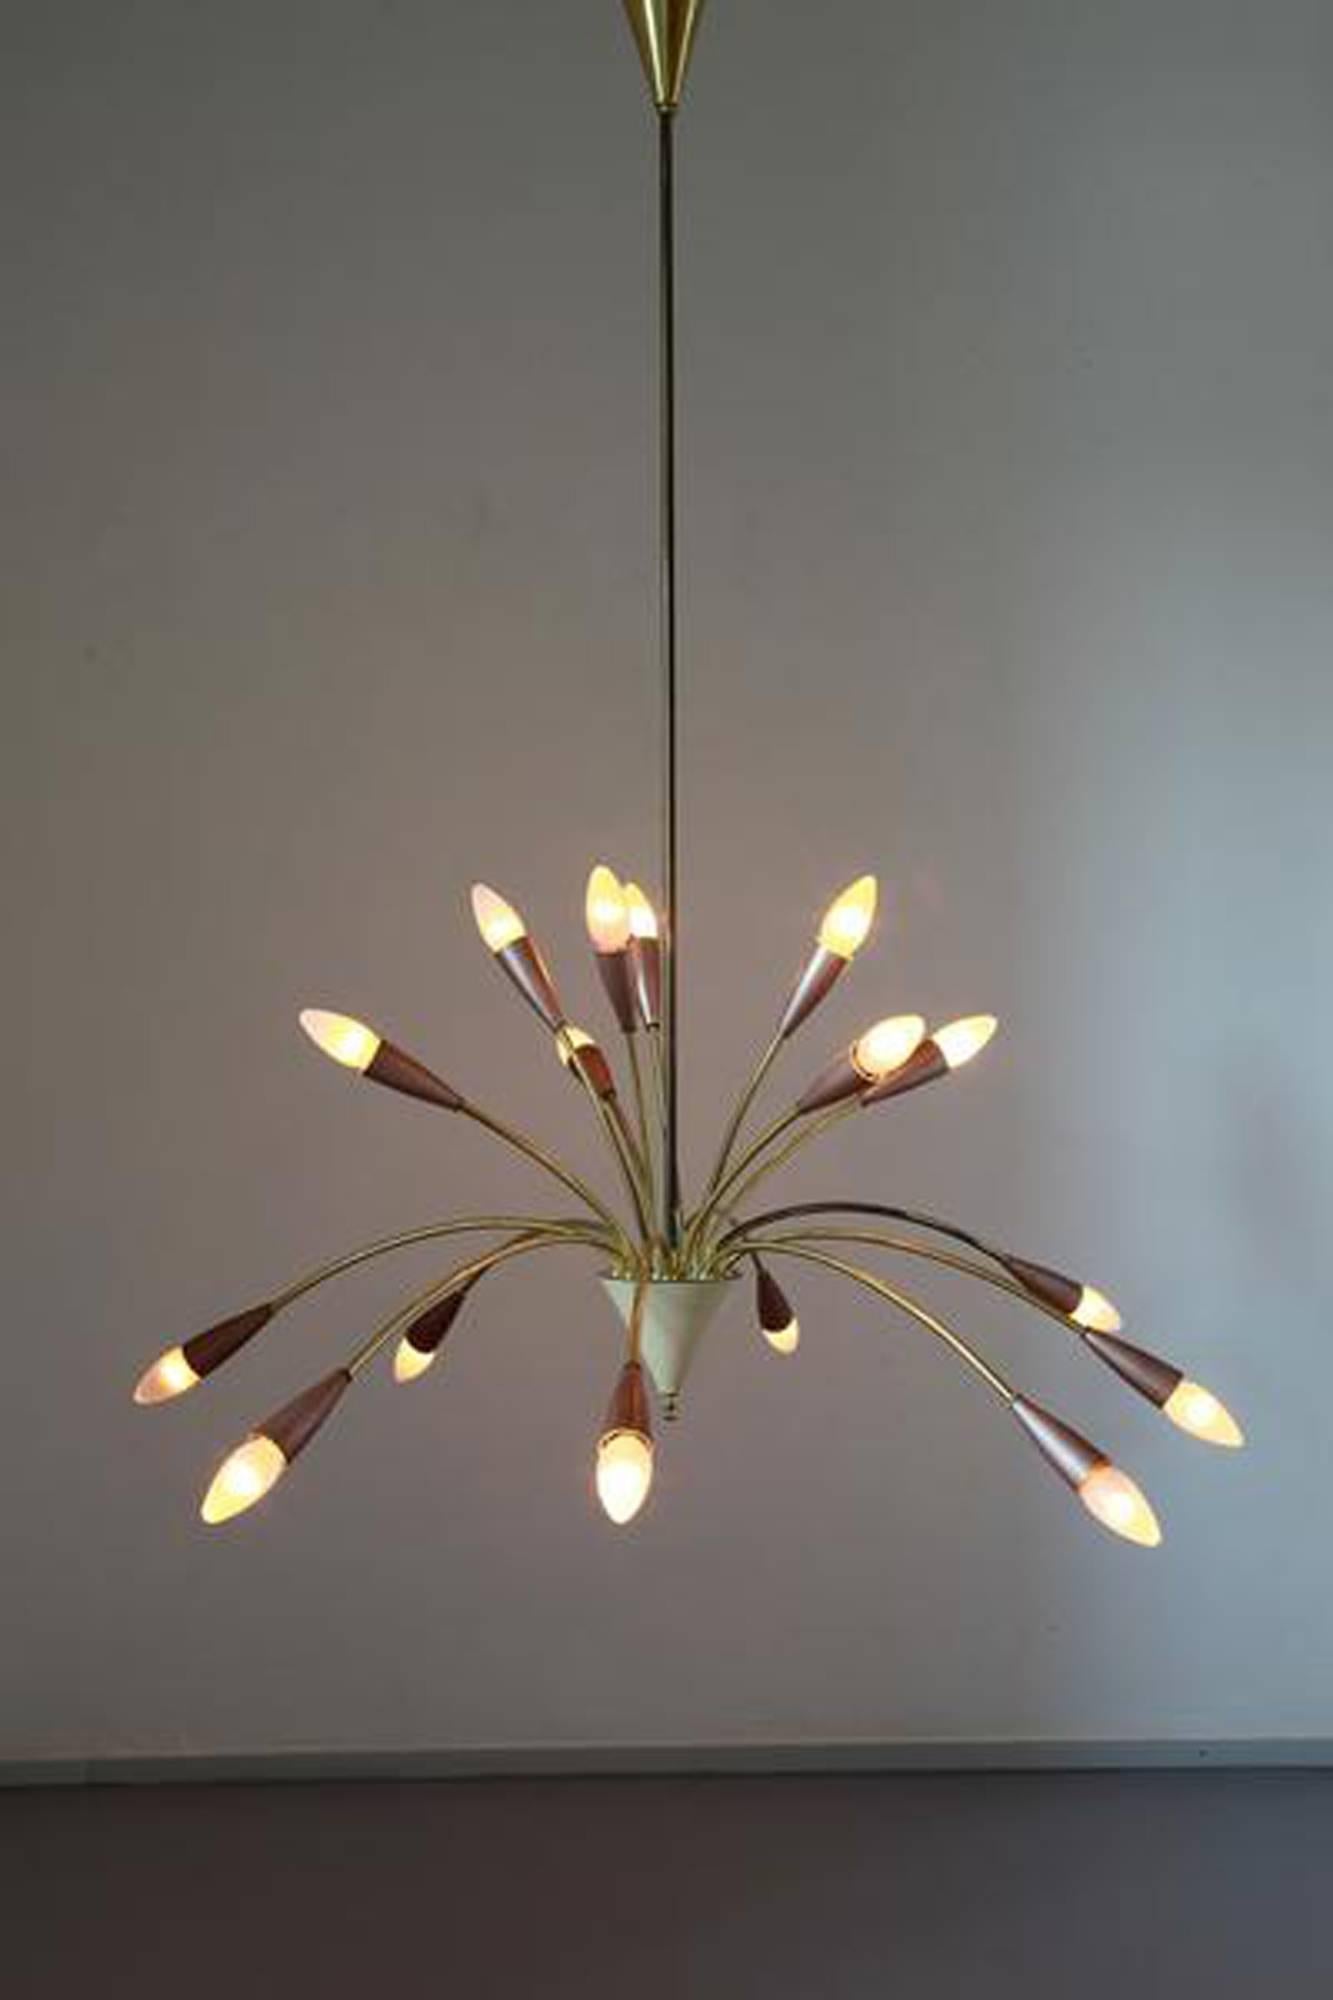 Spectacular 1950s Sixteen-Arm Sputnik Spider Chandelier In Good Condition For Sale In Kingston, NY